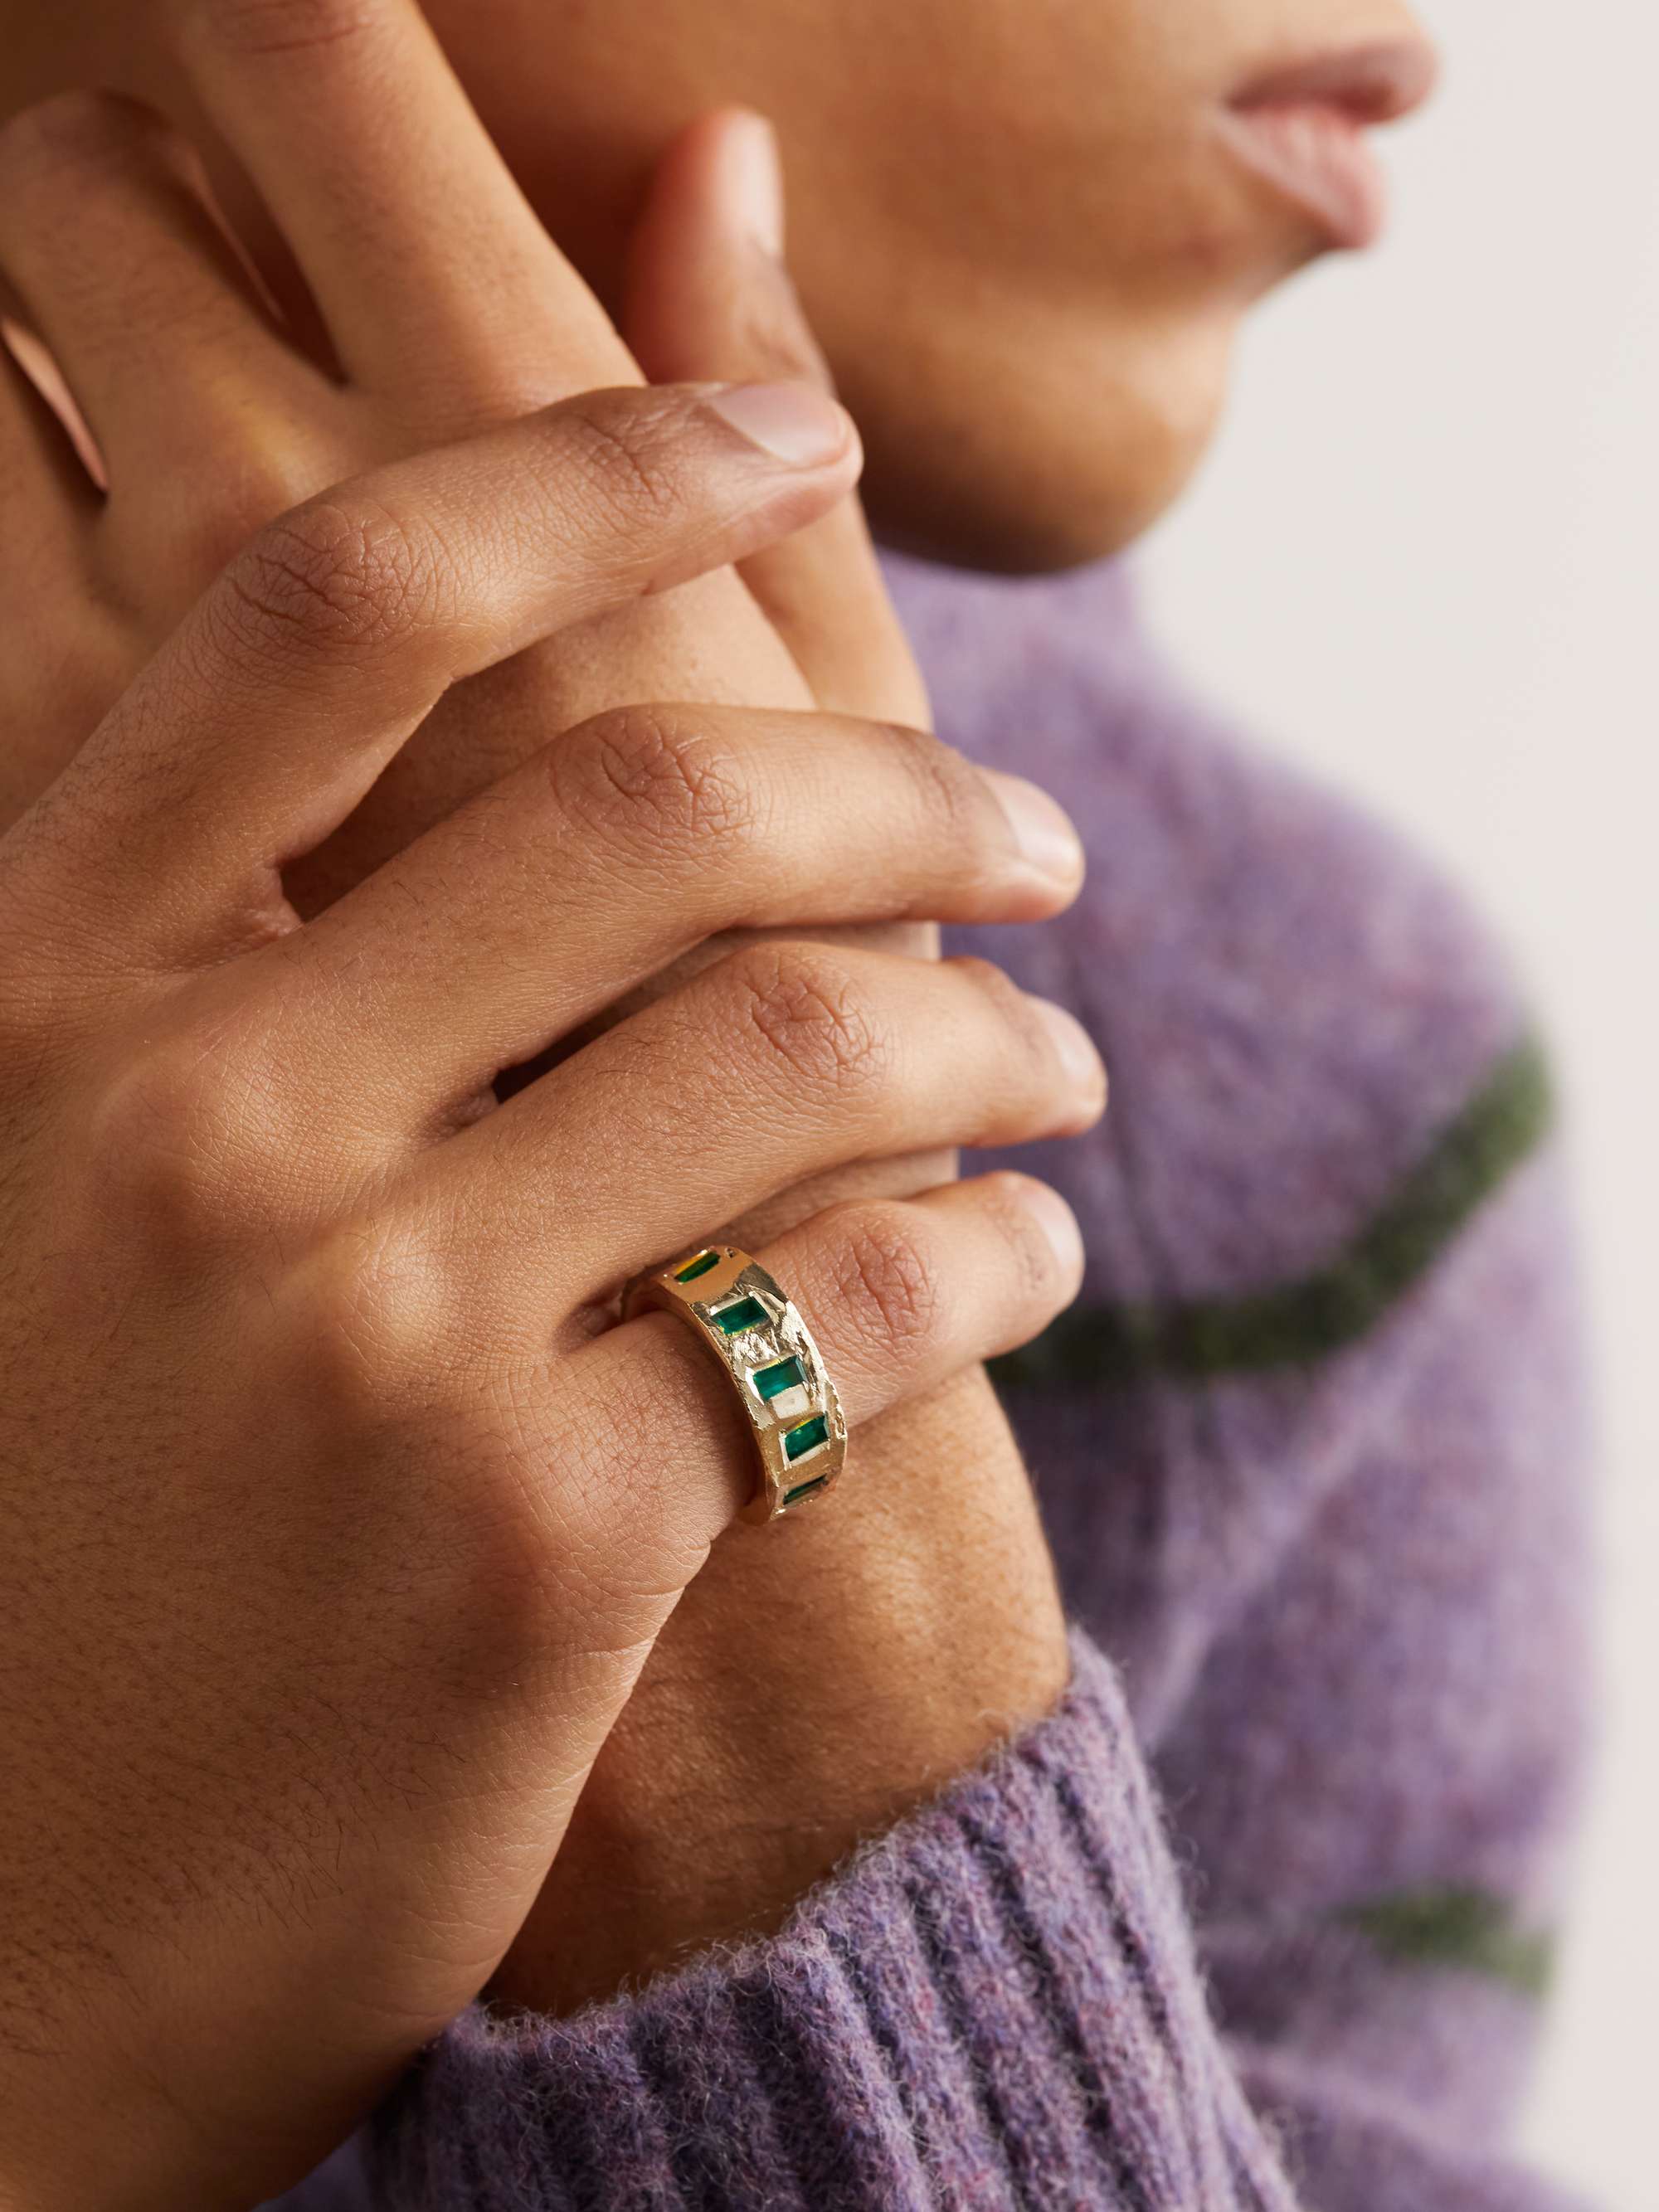 THE OUZE 9-Karat Gold Hydrothermal Emerald Ring